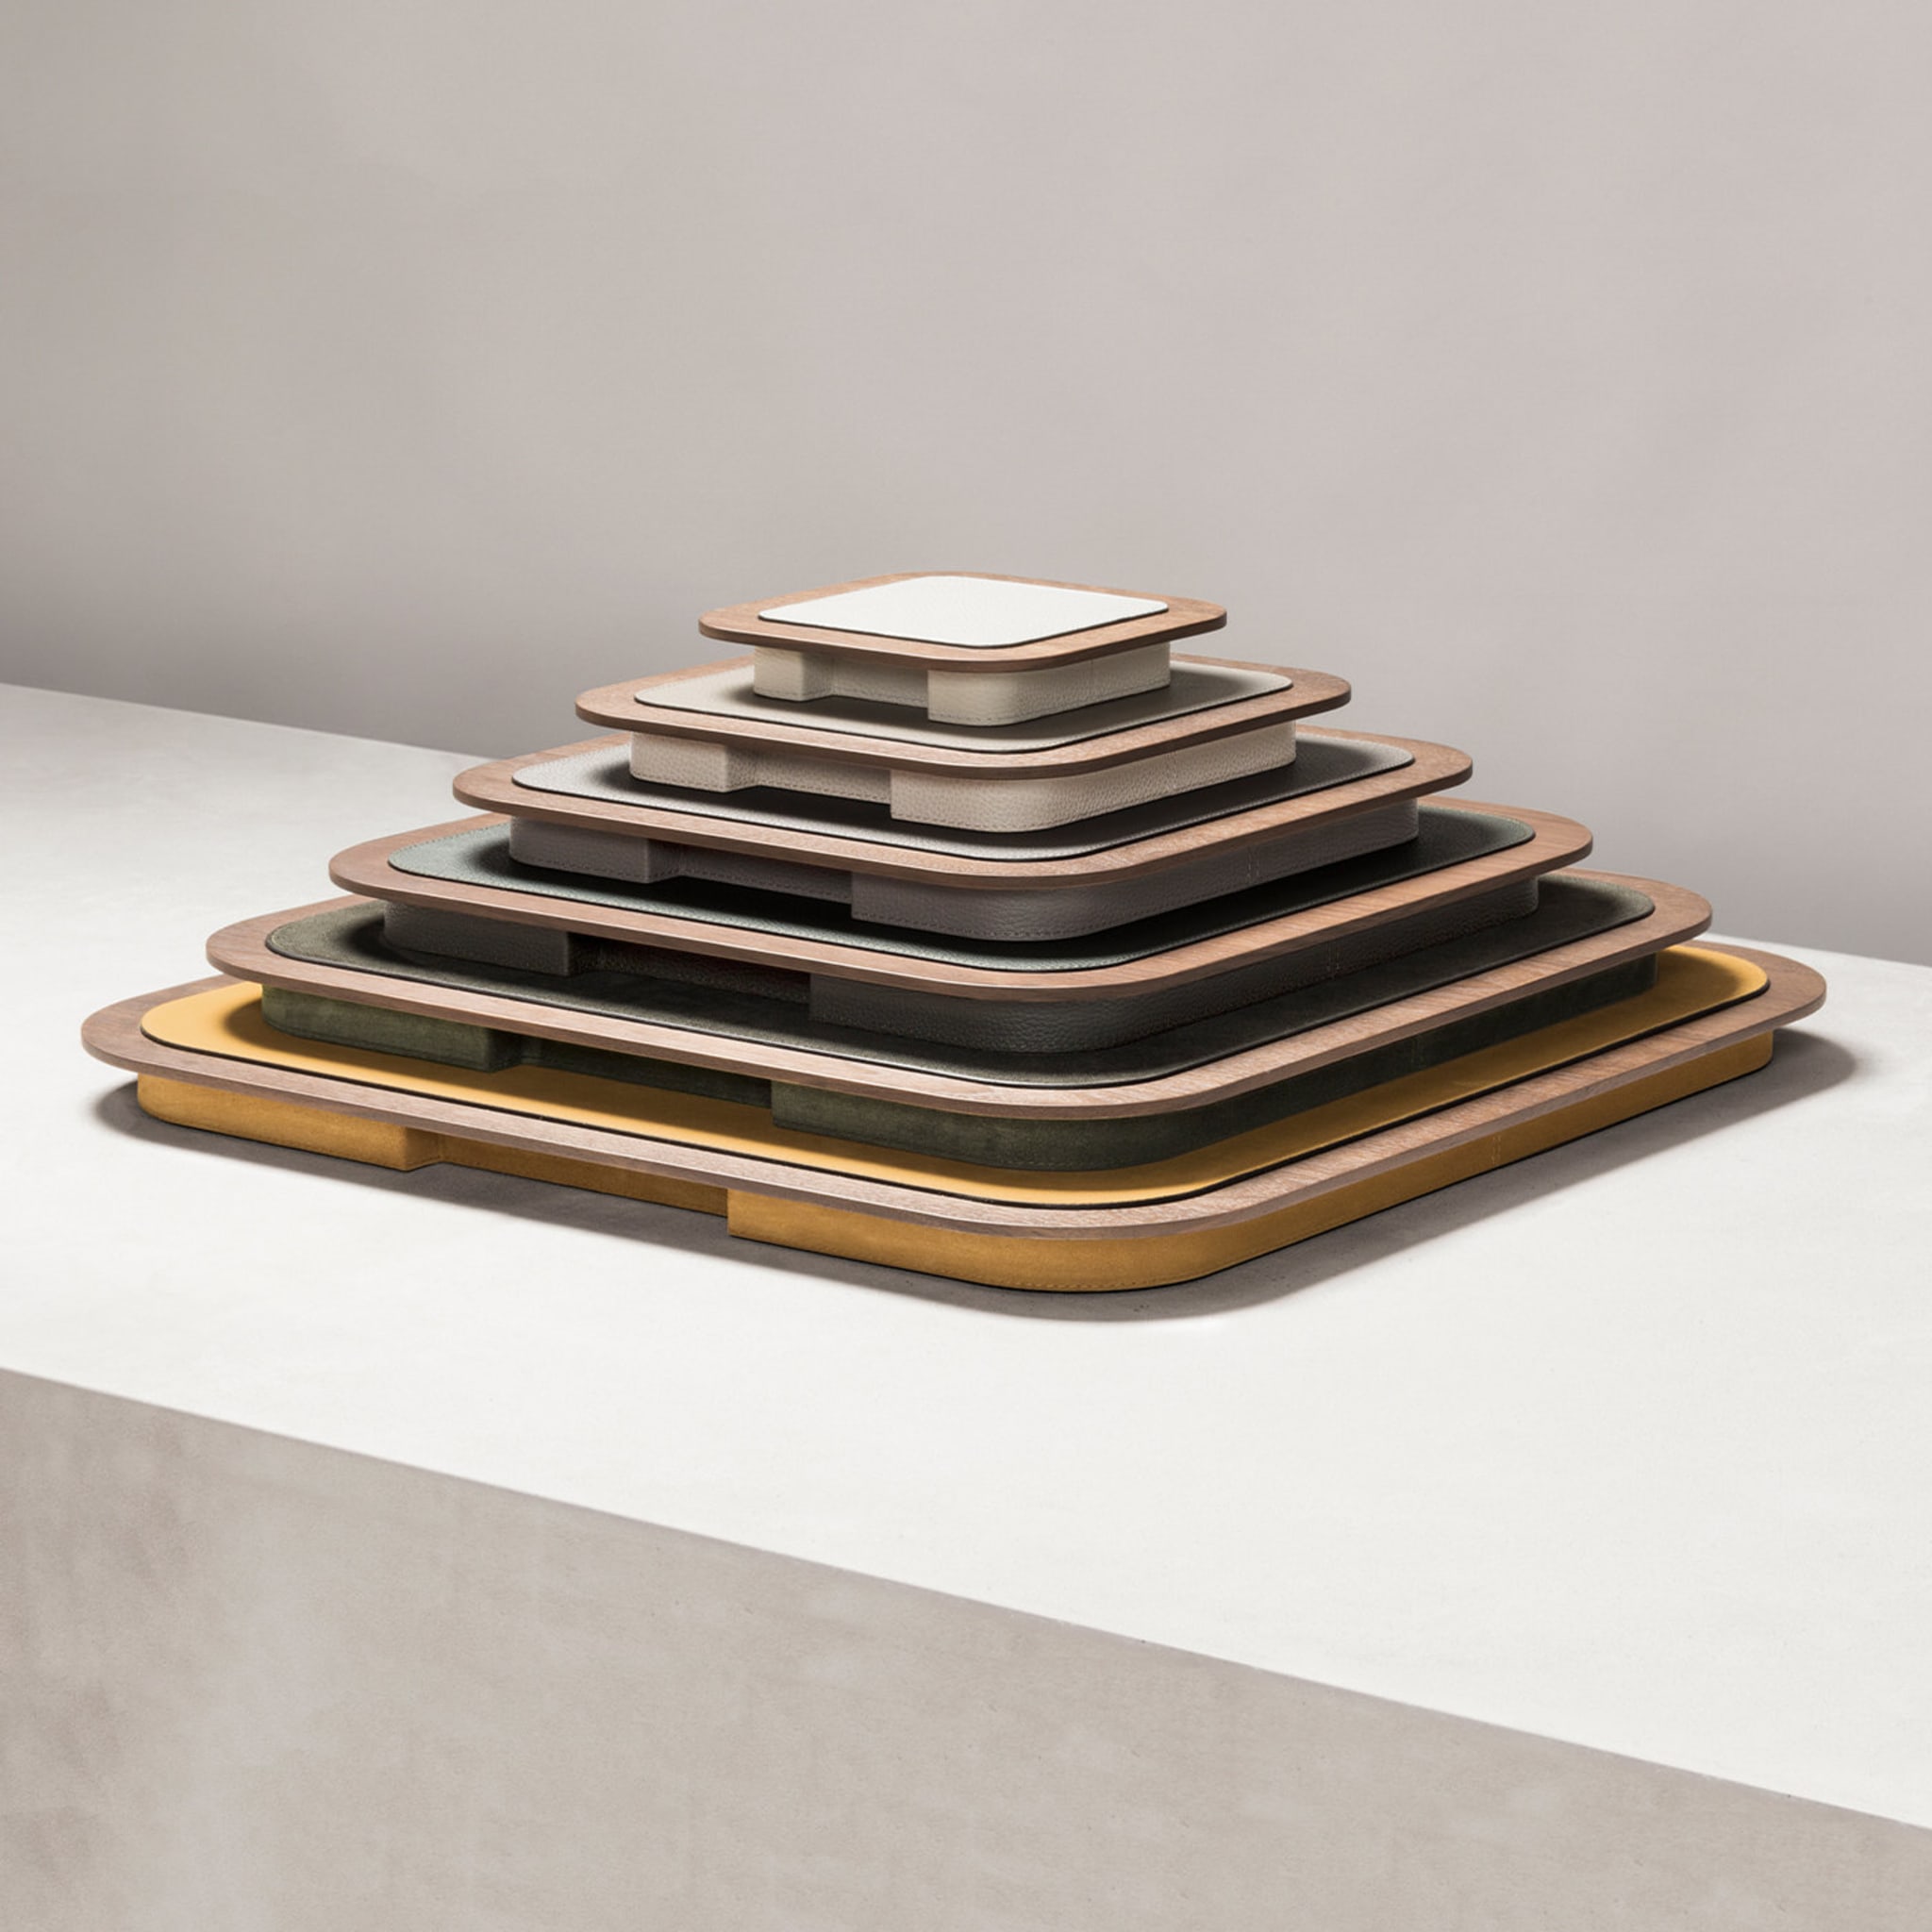 Lloyd Square Tray N. 1 in White and Walnut - Alternative view 3